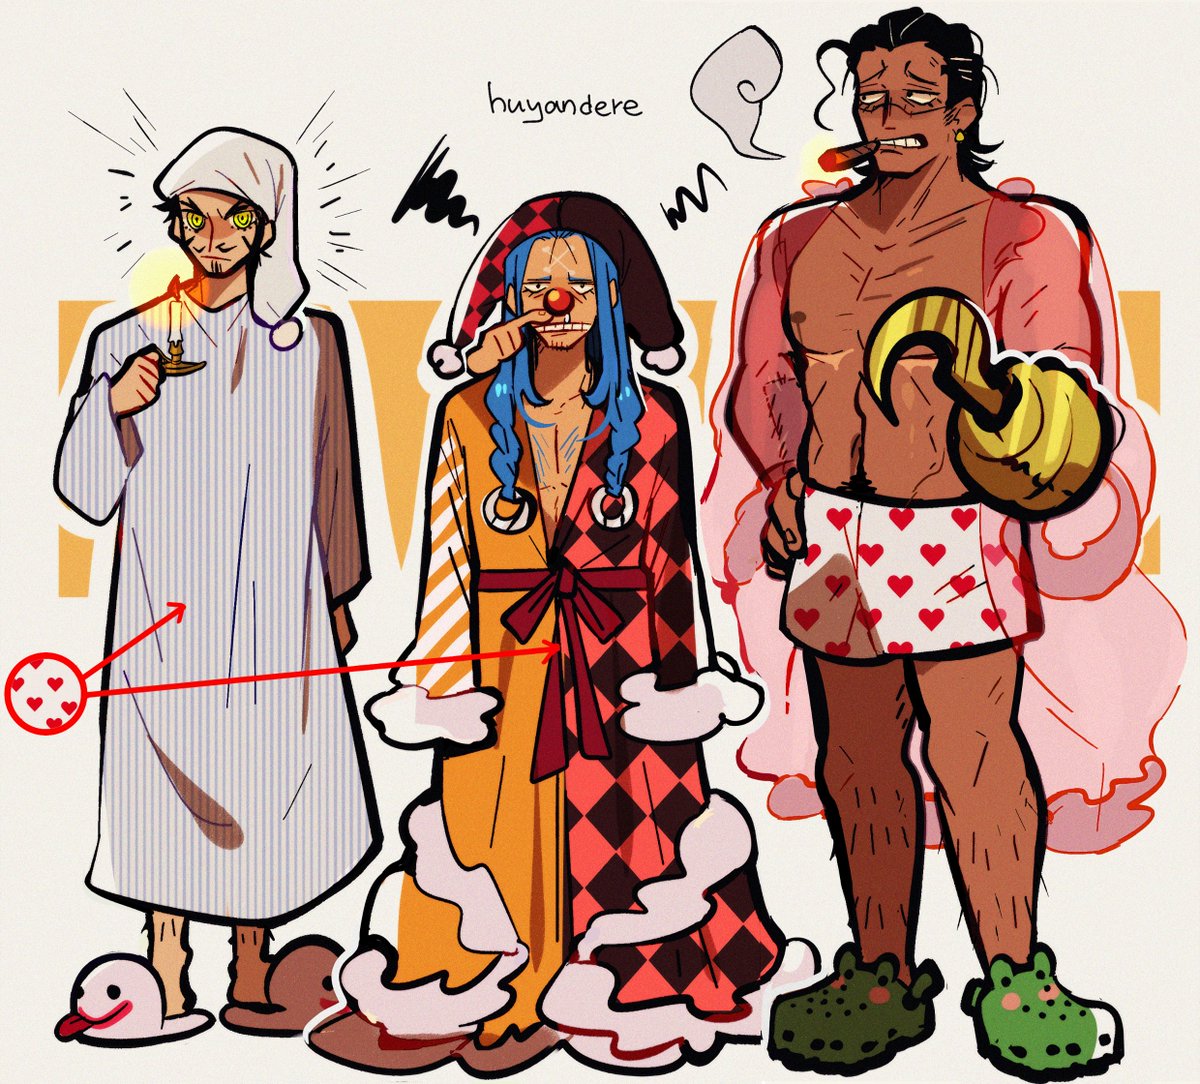 cross guild except they overlap
#ONEPIECE